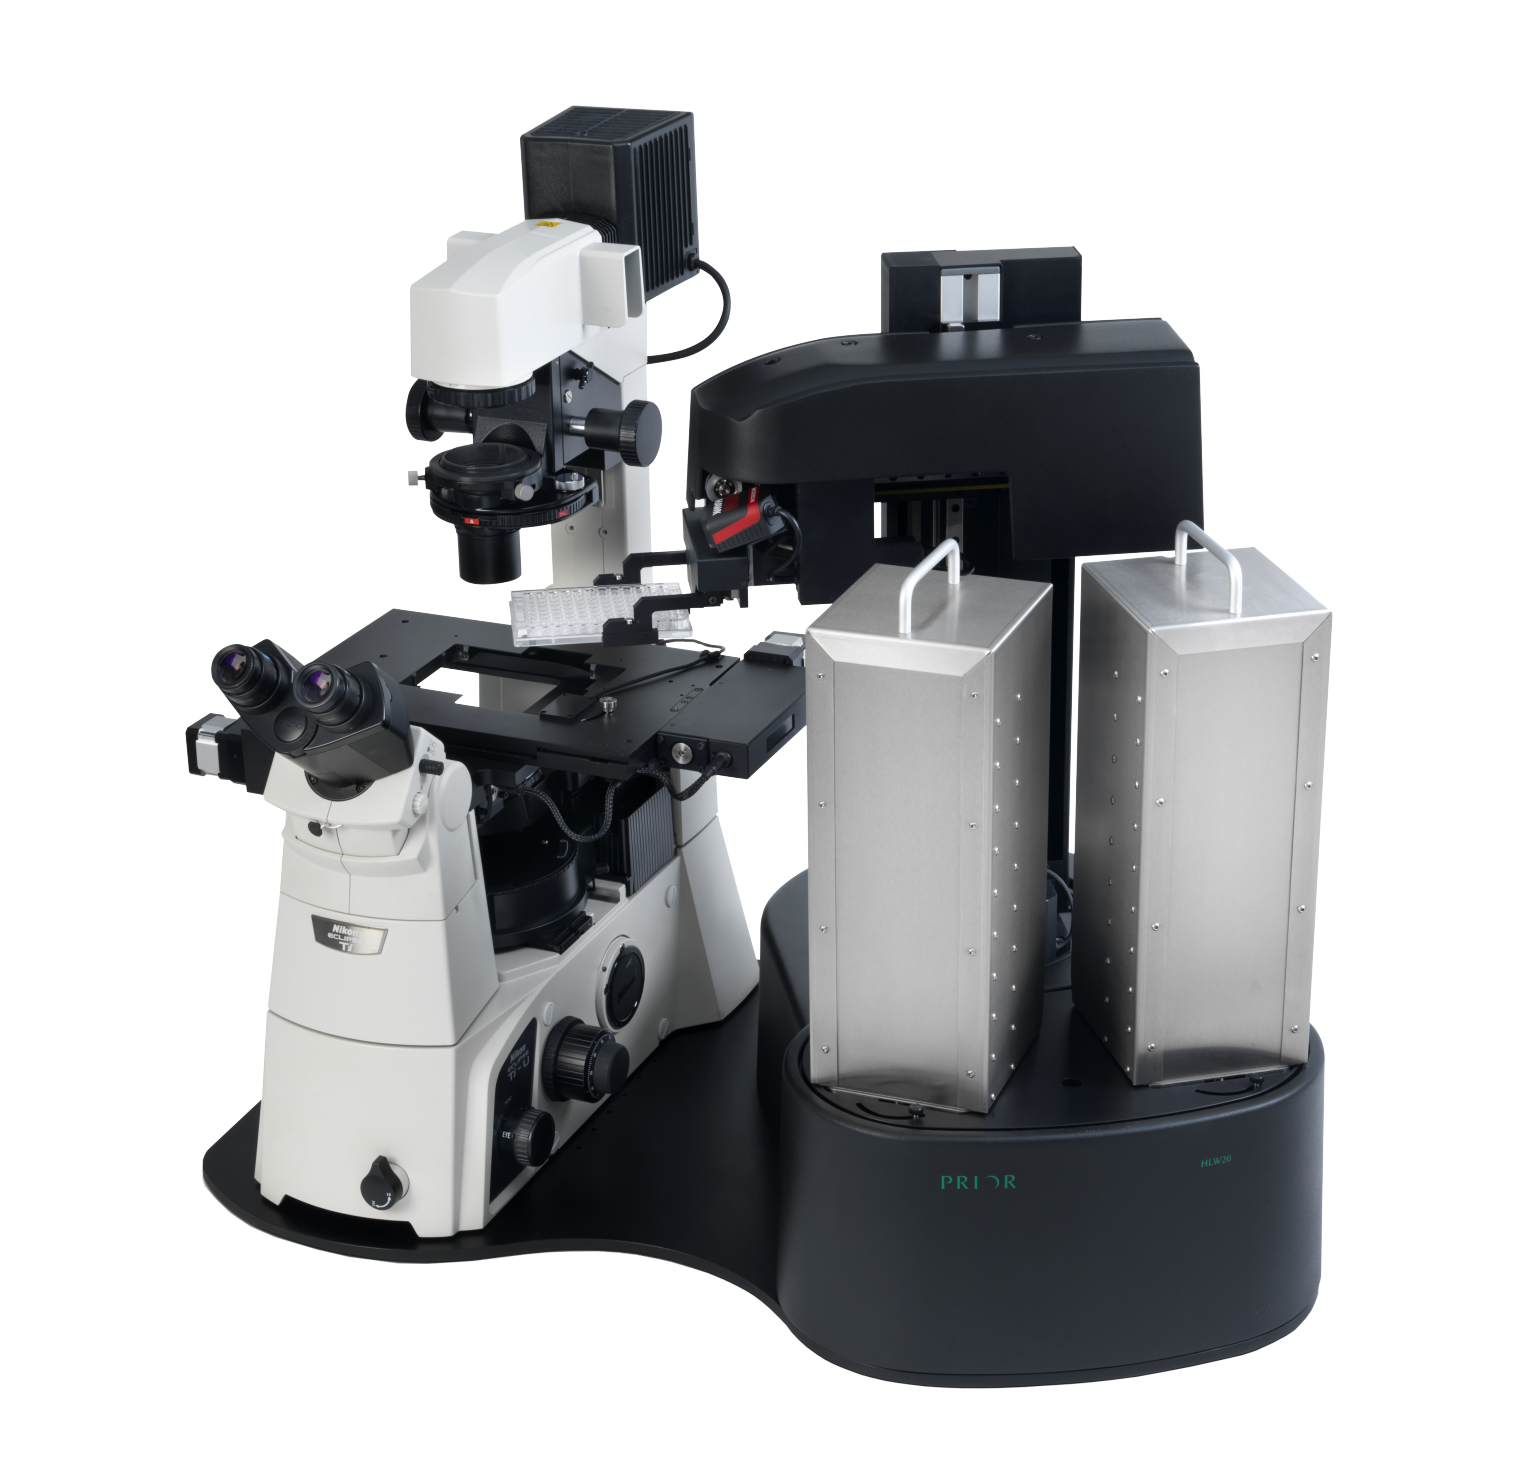 Prior offer a range of microscope components including robotic sample holders, Piezo assemblies and more